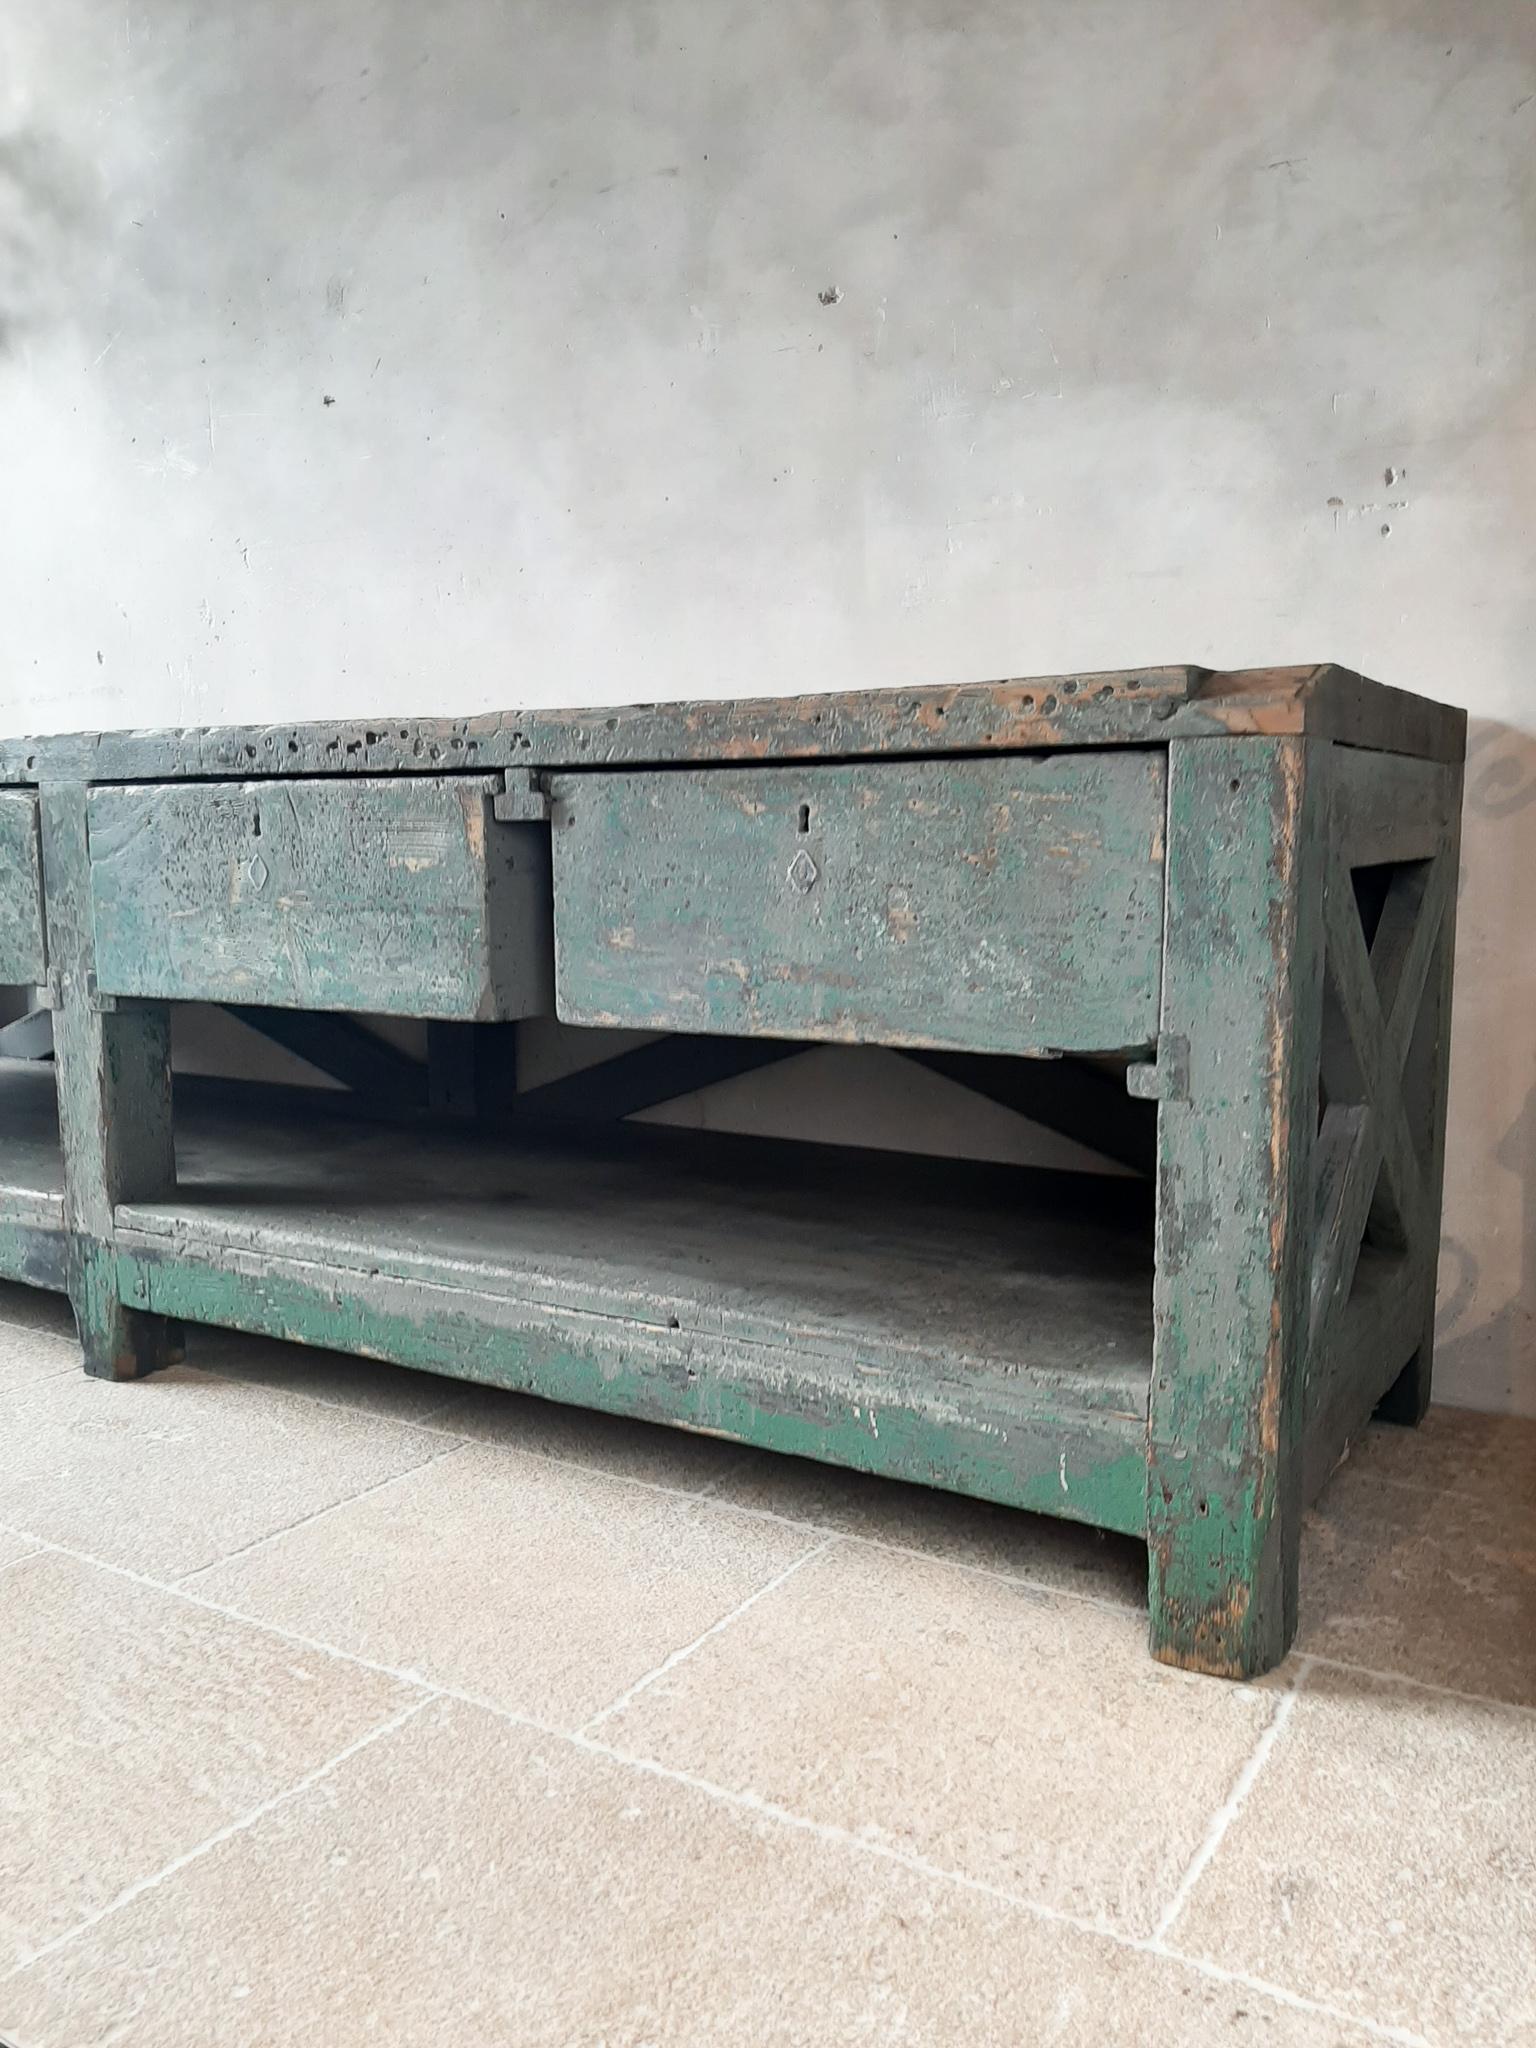 20th Century Very Large Dutch Workbench from the 1950s with Original Old Paint Remnants